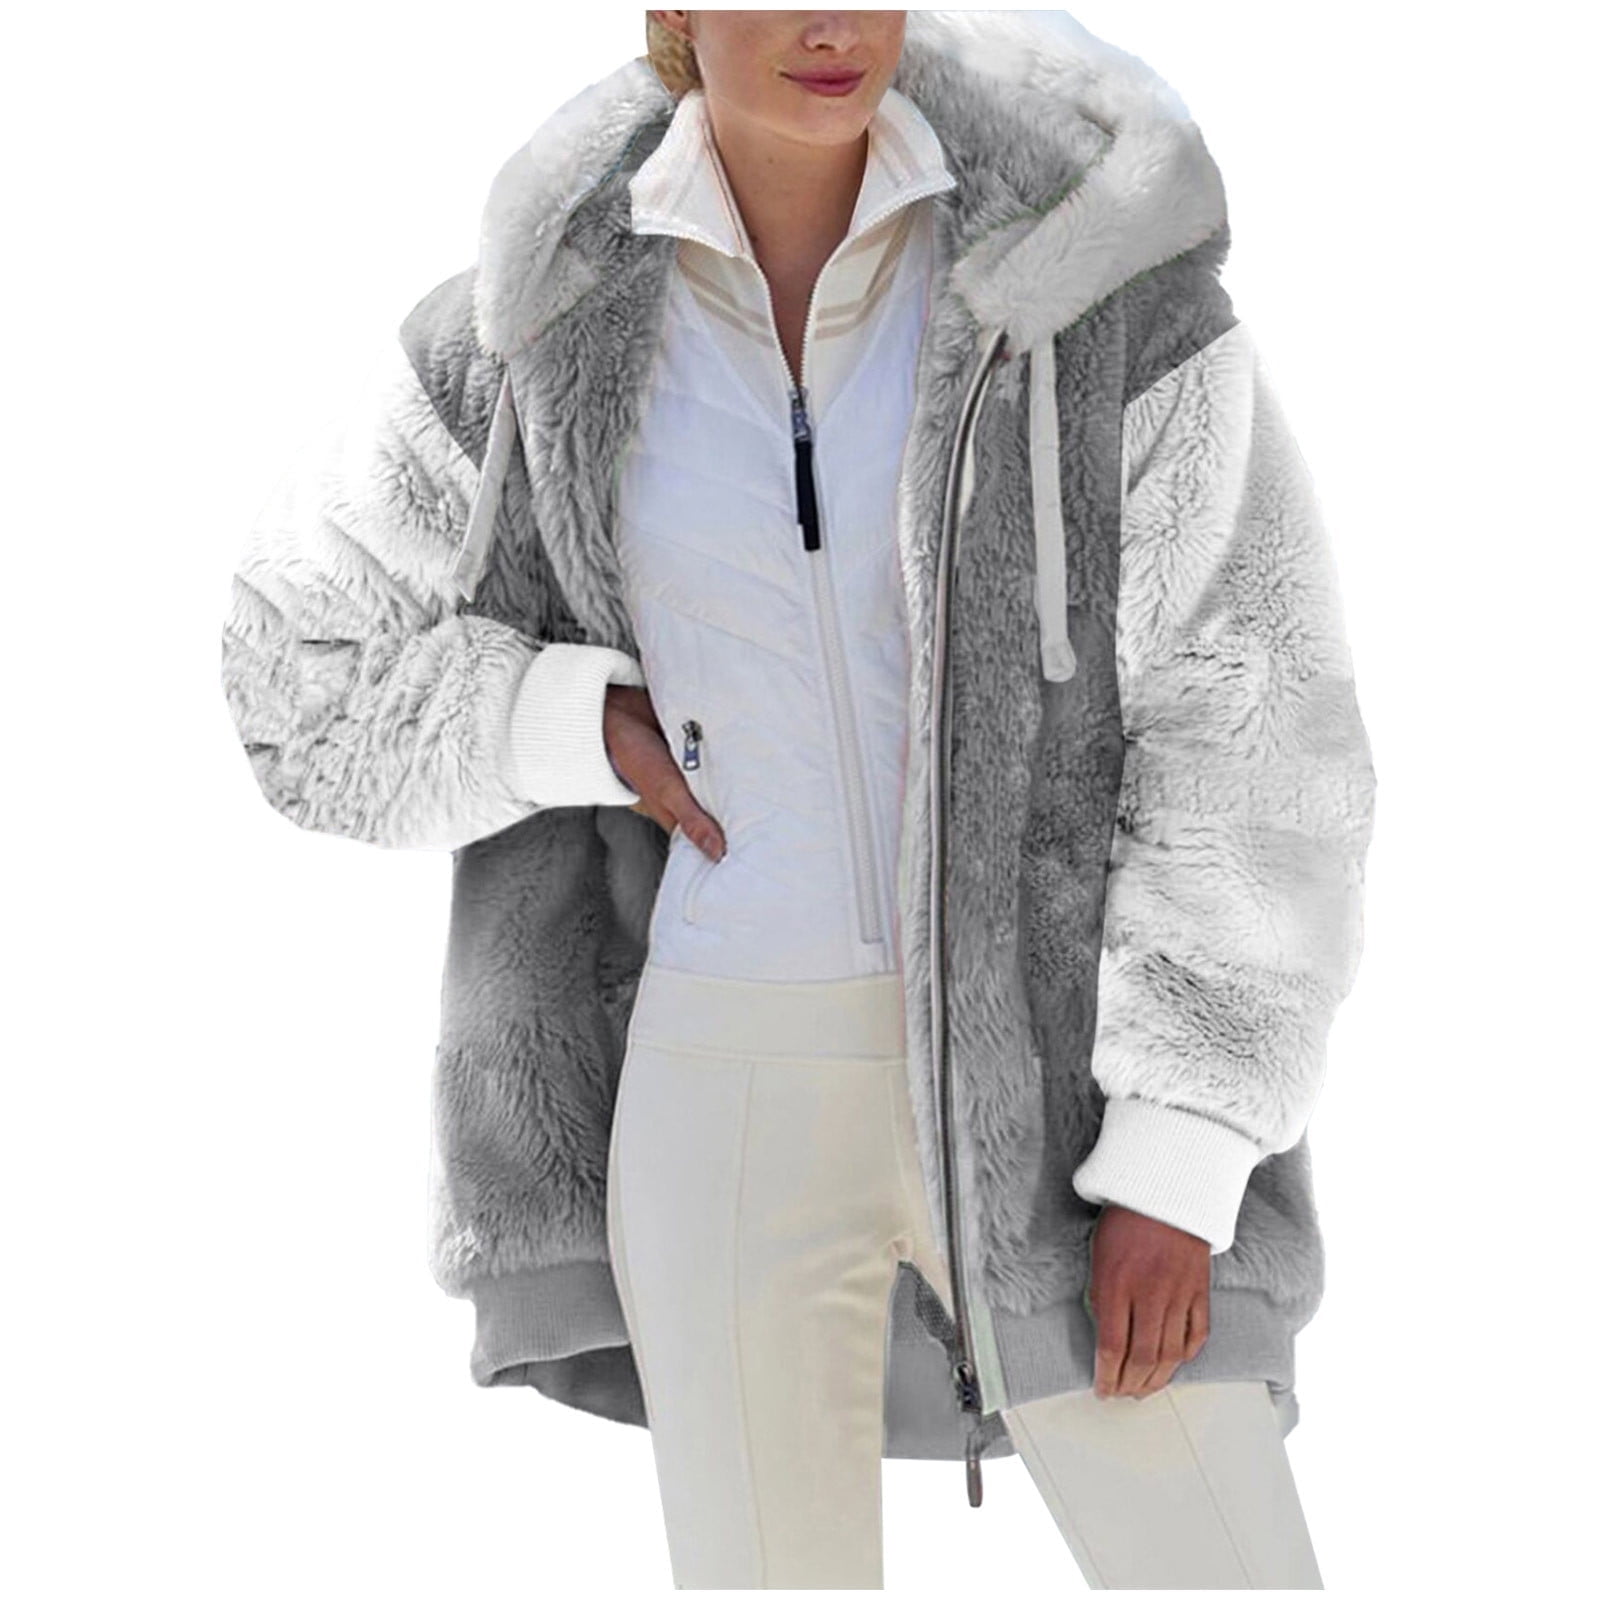 Winter Coats Womens Fashion Plus Size Extreme Cold Weather Outwear ...